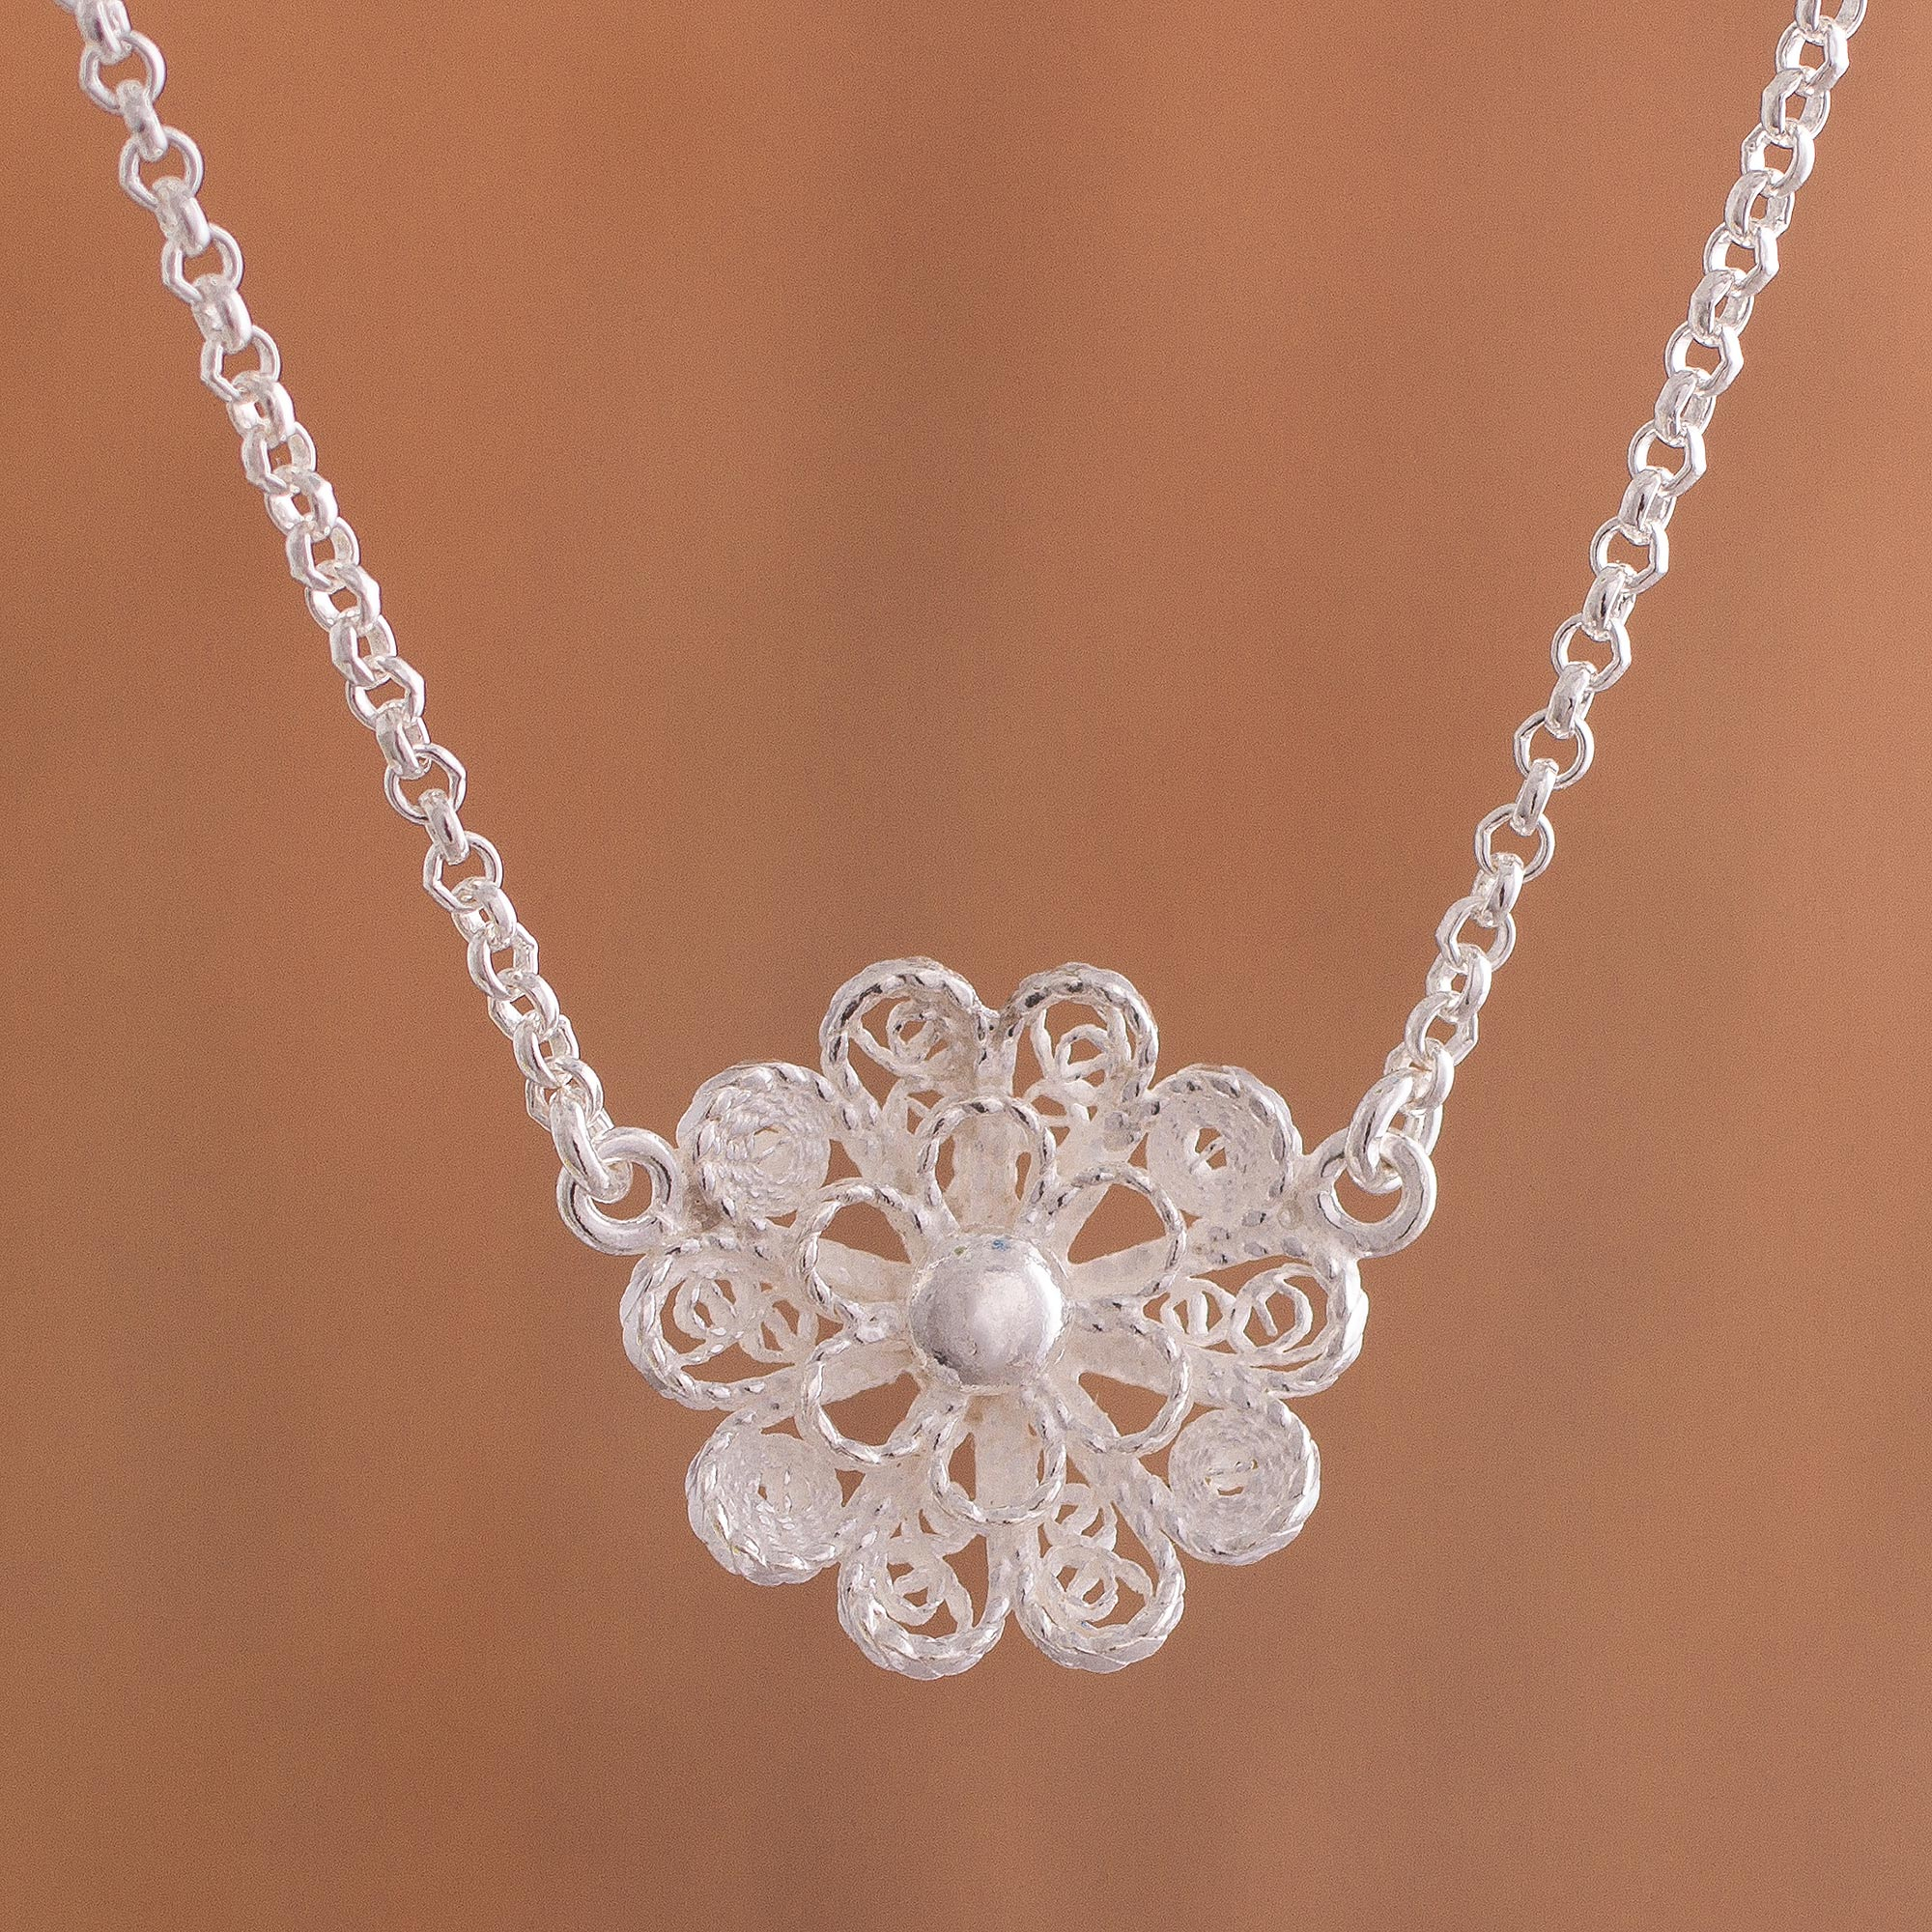 925 Sterling Artisan Handcrafted Filigree Delicate Flower Necklace Dainty Jewelry Silver Minimalist Floral Charm Necklace Pendant